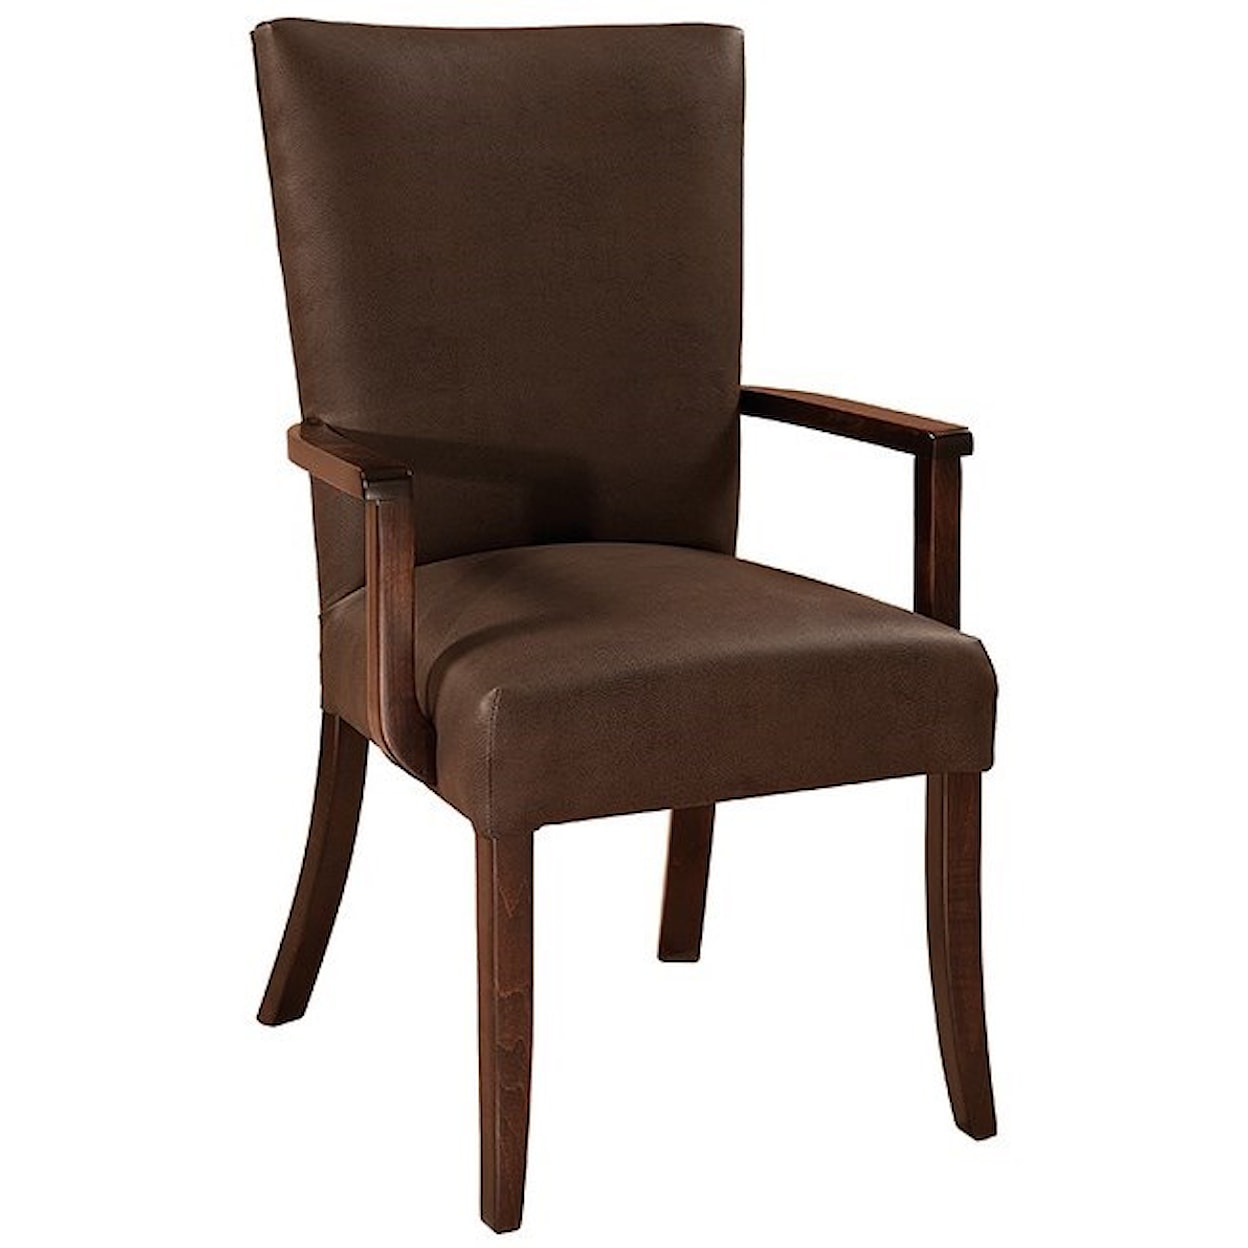 F&N Woodworking Trenton Customizable Solid Wood Arm Chair